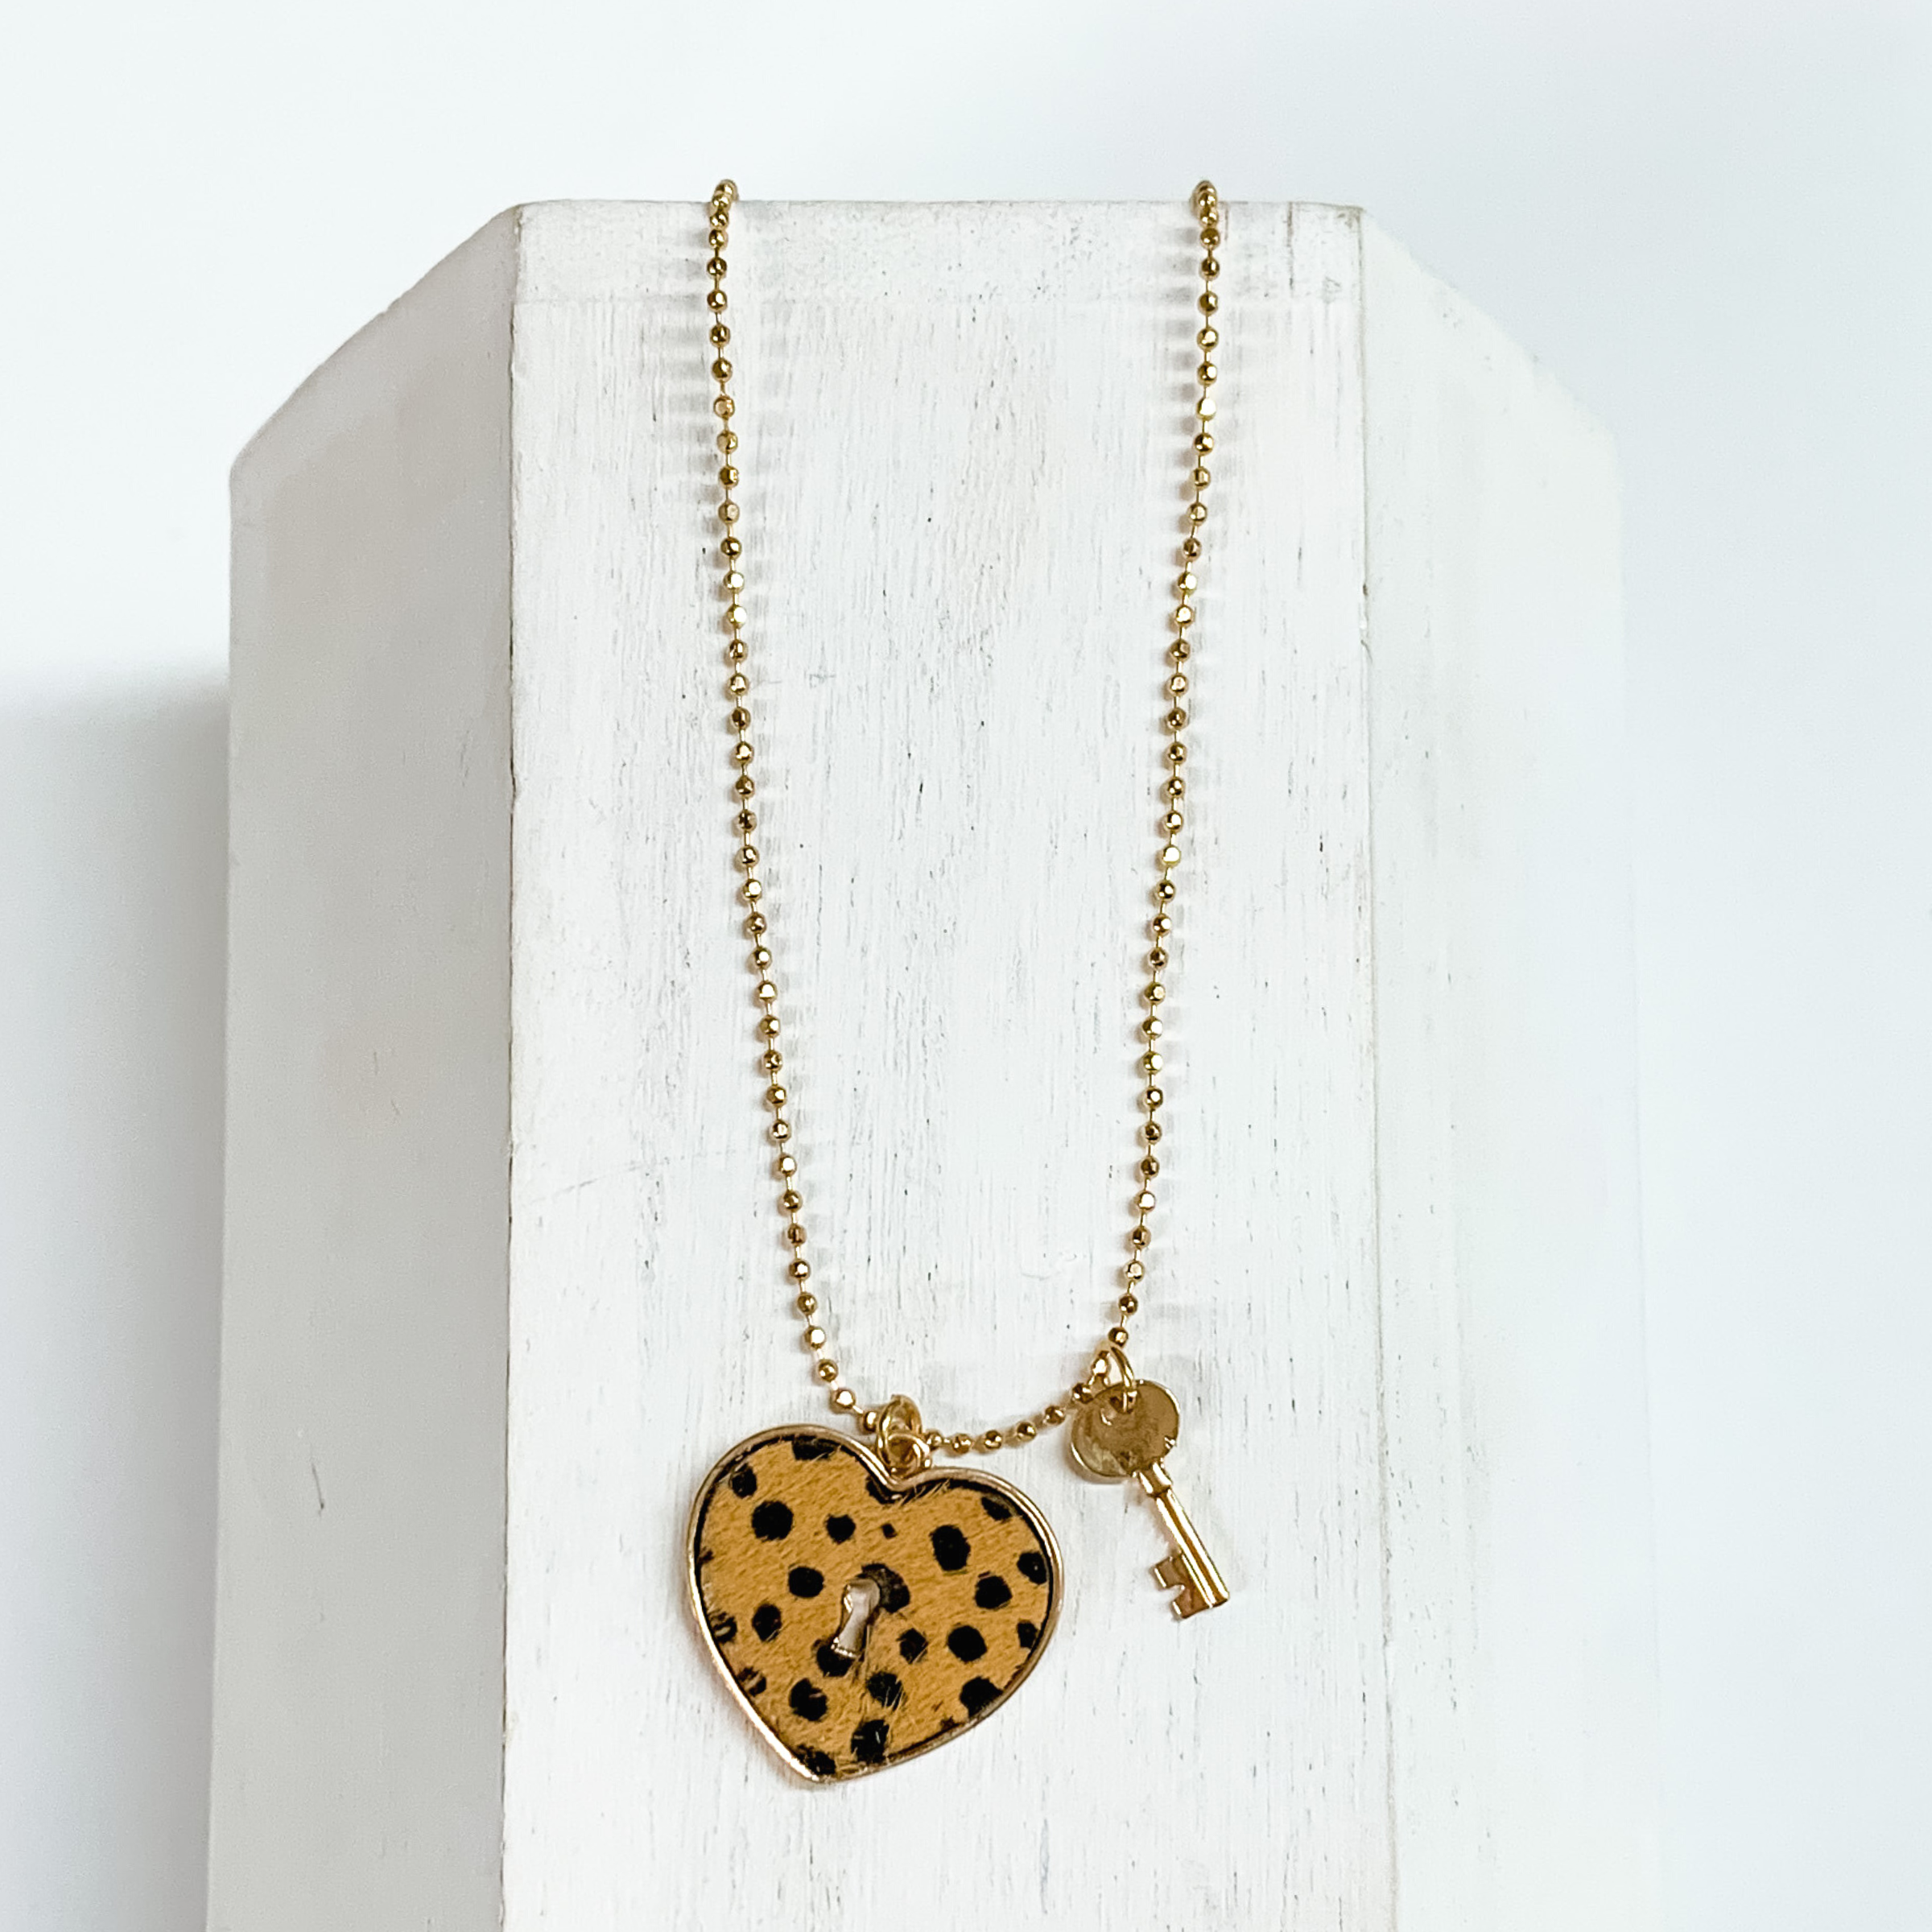 Gold, ball chain necklace with a brown dotted heart pendant and gold key charm. This necklace is pictured on a white block on a white background.